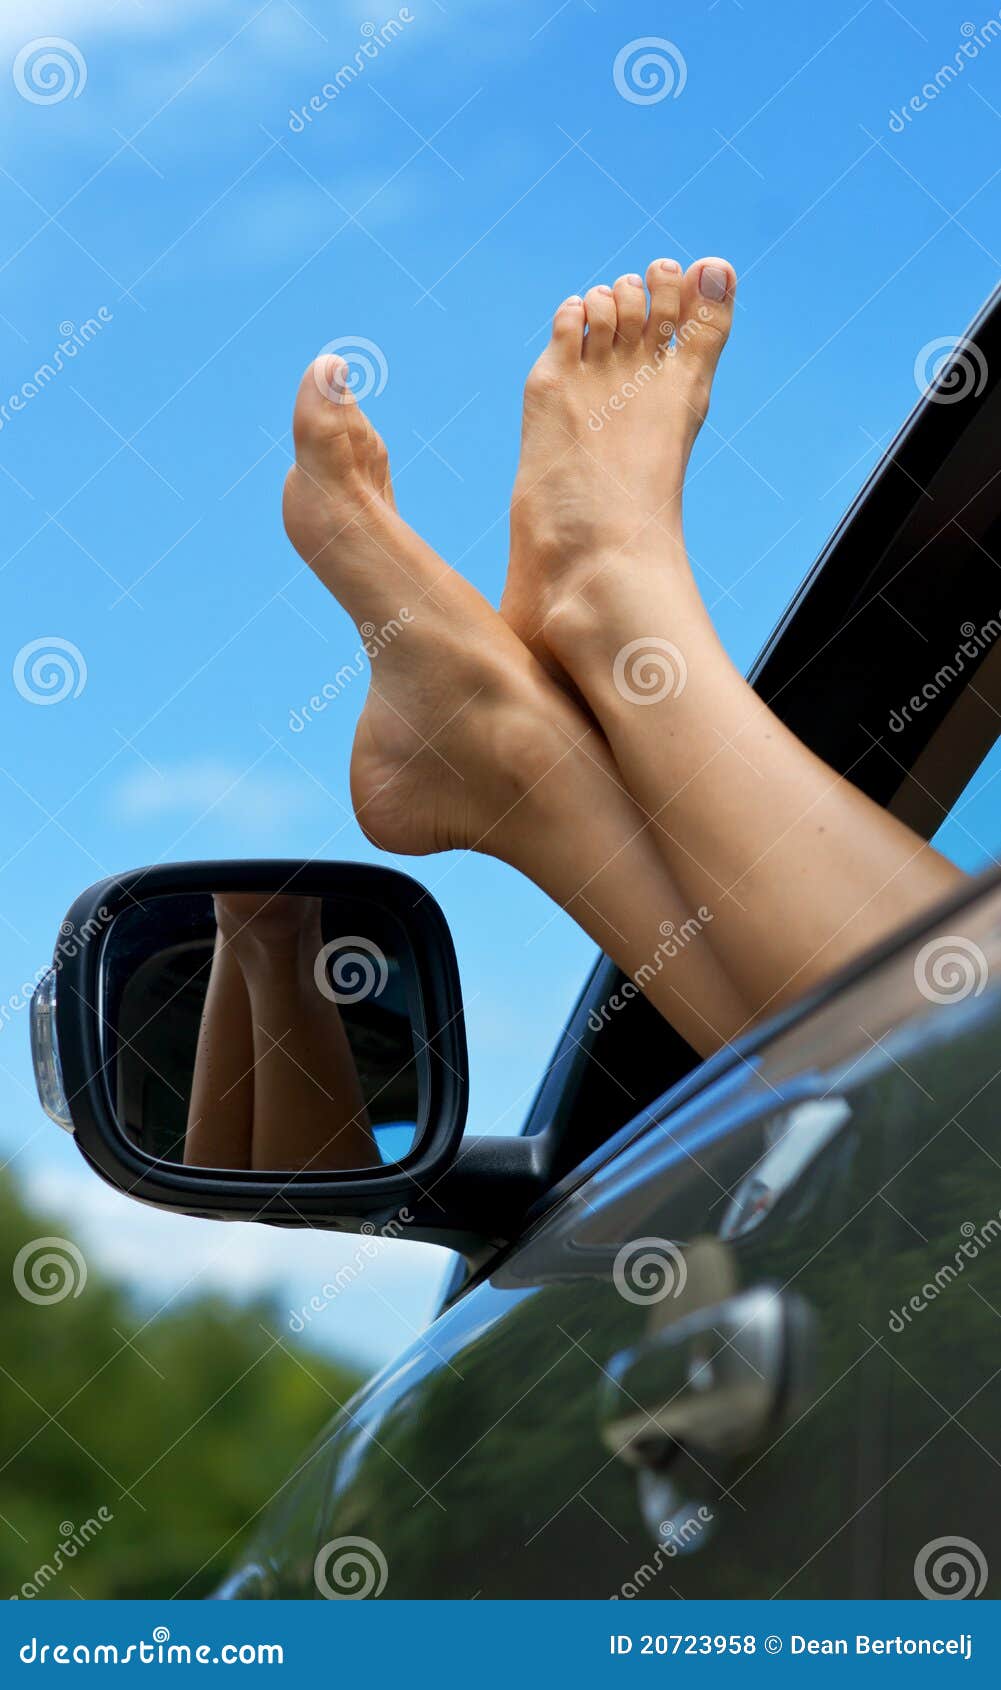 Woman Feet Out Of Car Window Royalty Free Stock